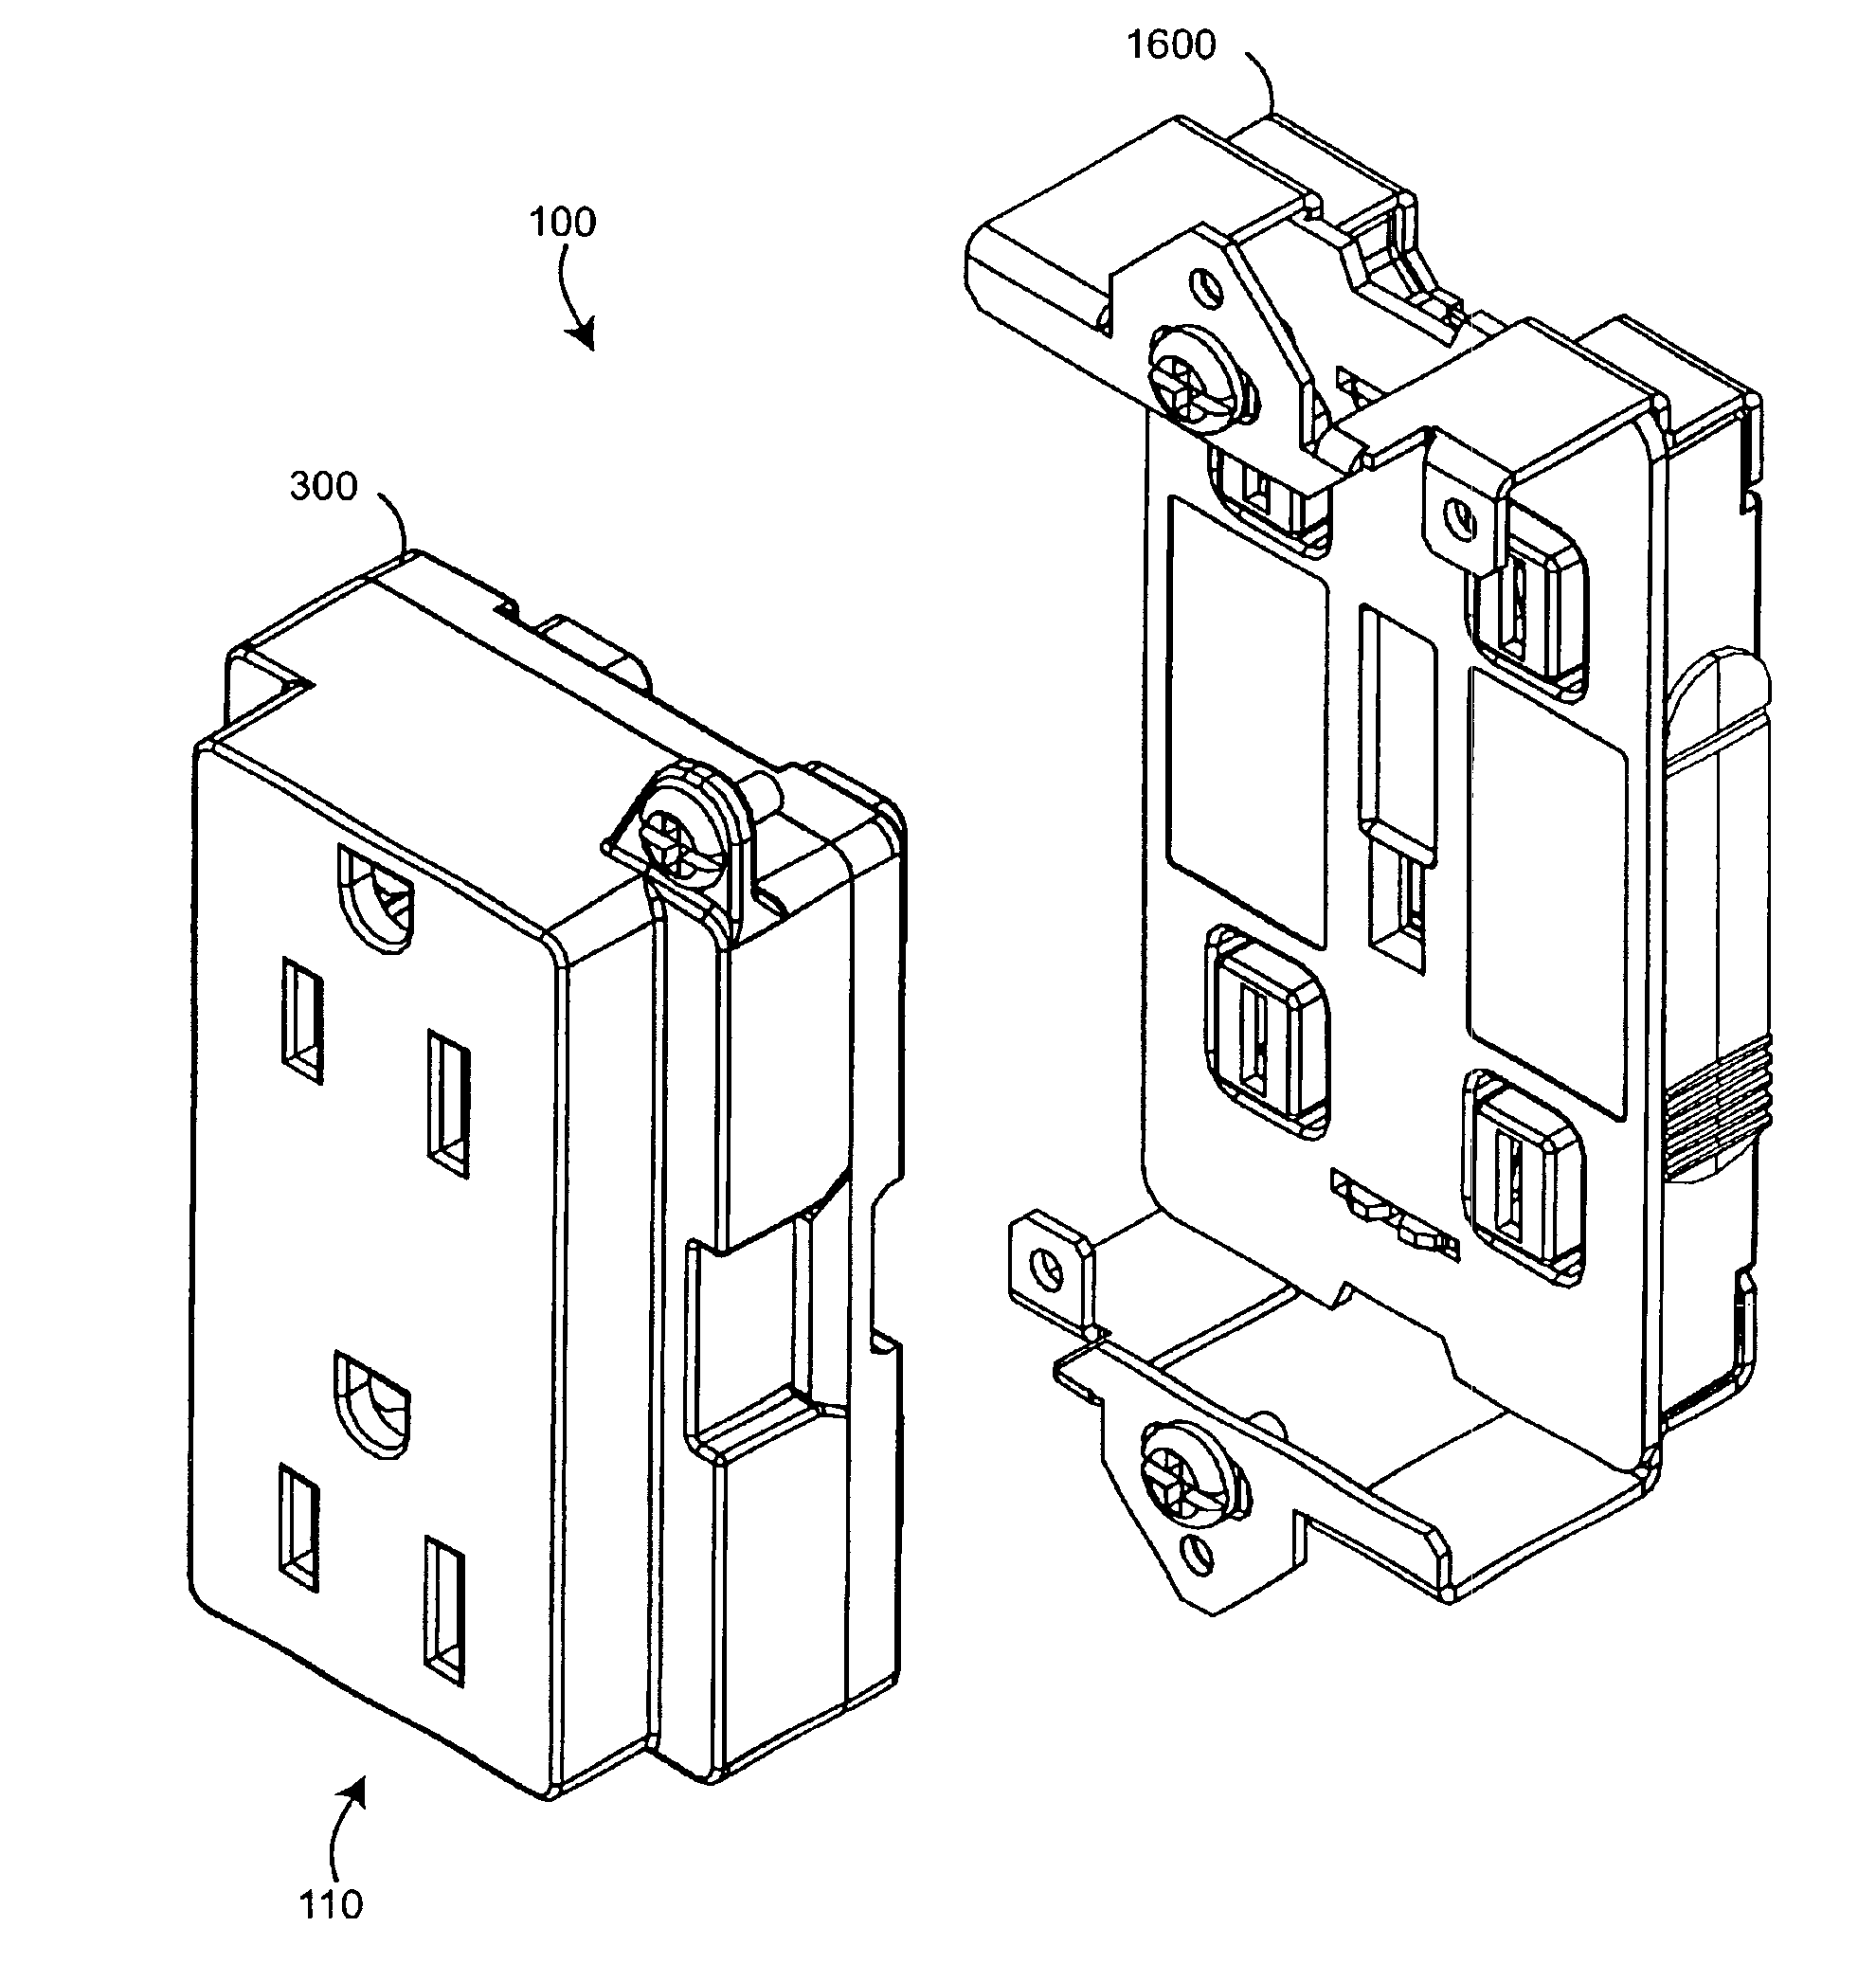 Safety module electrical distribution system